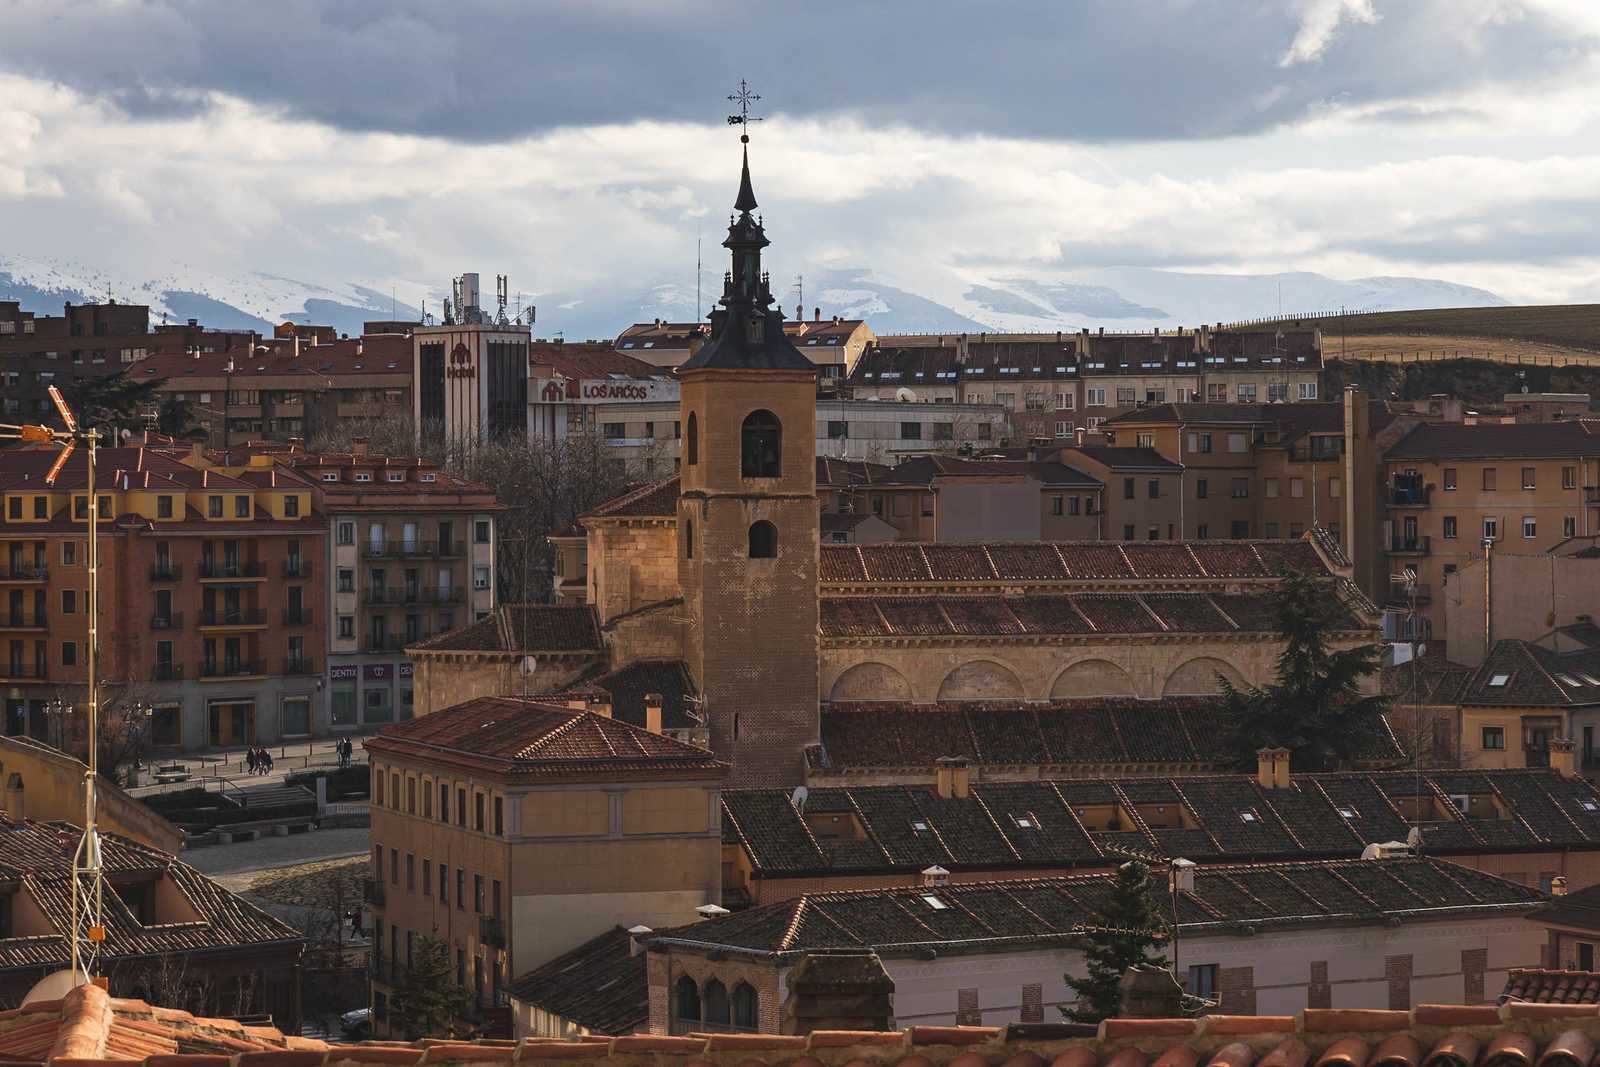 The rooftop architecture of Segovia, with snowy mountains shrouded in clouds behind